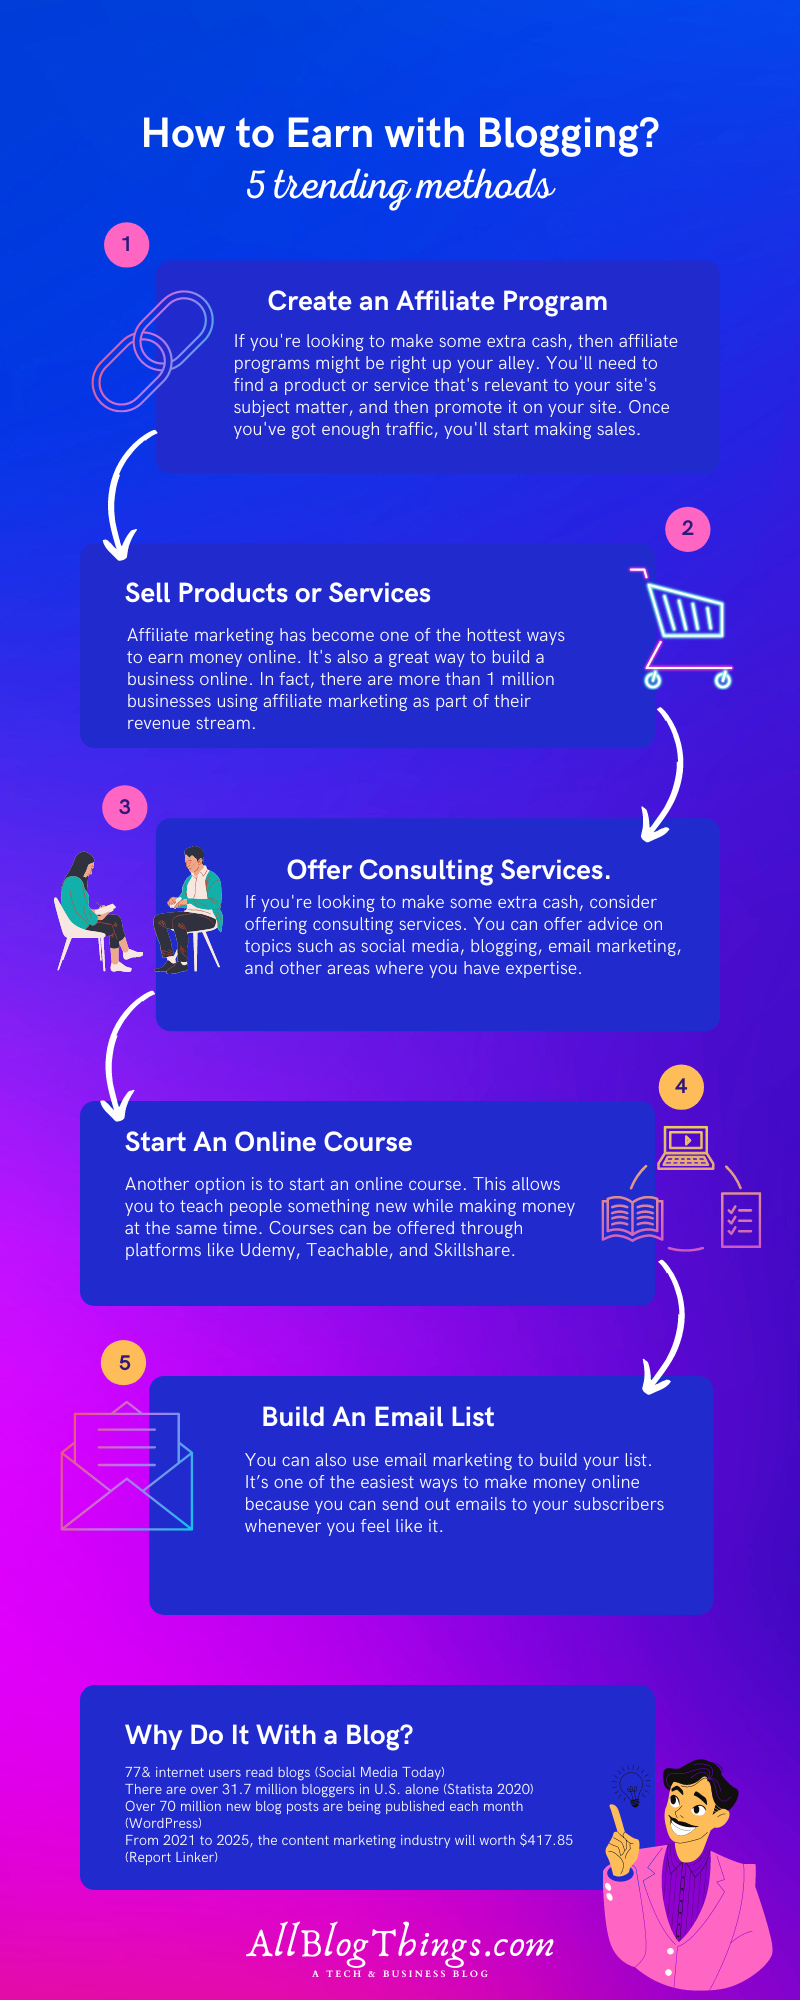 How to Make Money with Blogging – 5 Trending Methods Infographic